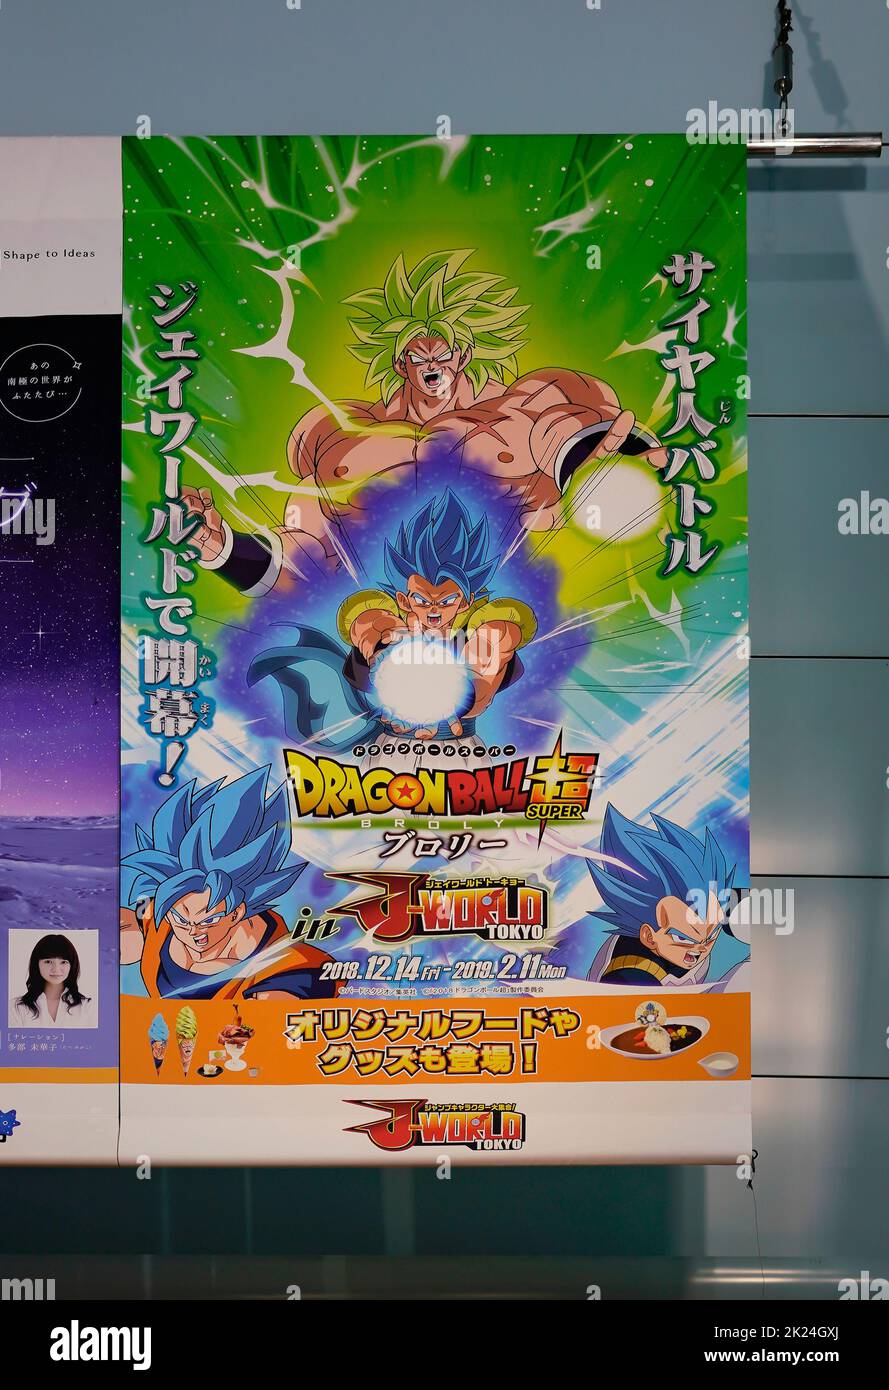 tokyo, japan - december 21 2018: Poster of Japanese Anime movie of Dragon Ball Super Broly featuring the ancient theme park of J-World Tokyo closed in Stock Photo